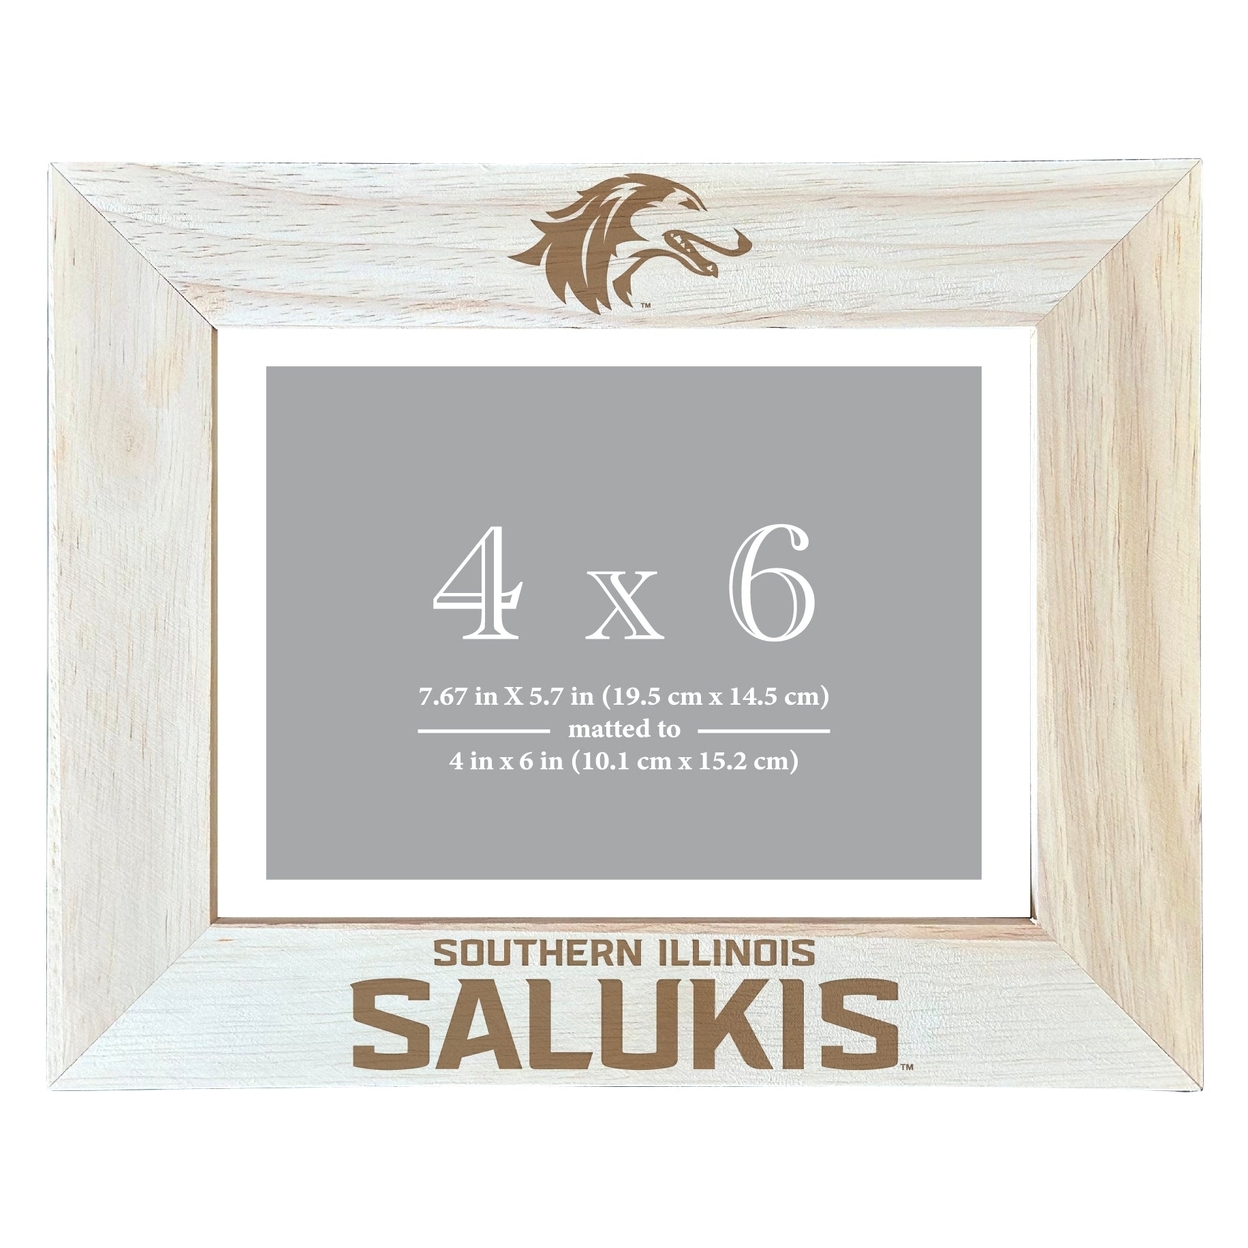 Southern Illinois Salukis Wooden Photo Frame Matted To 4 X 6 Inch - Etched